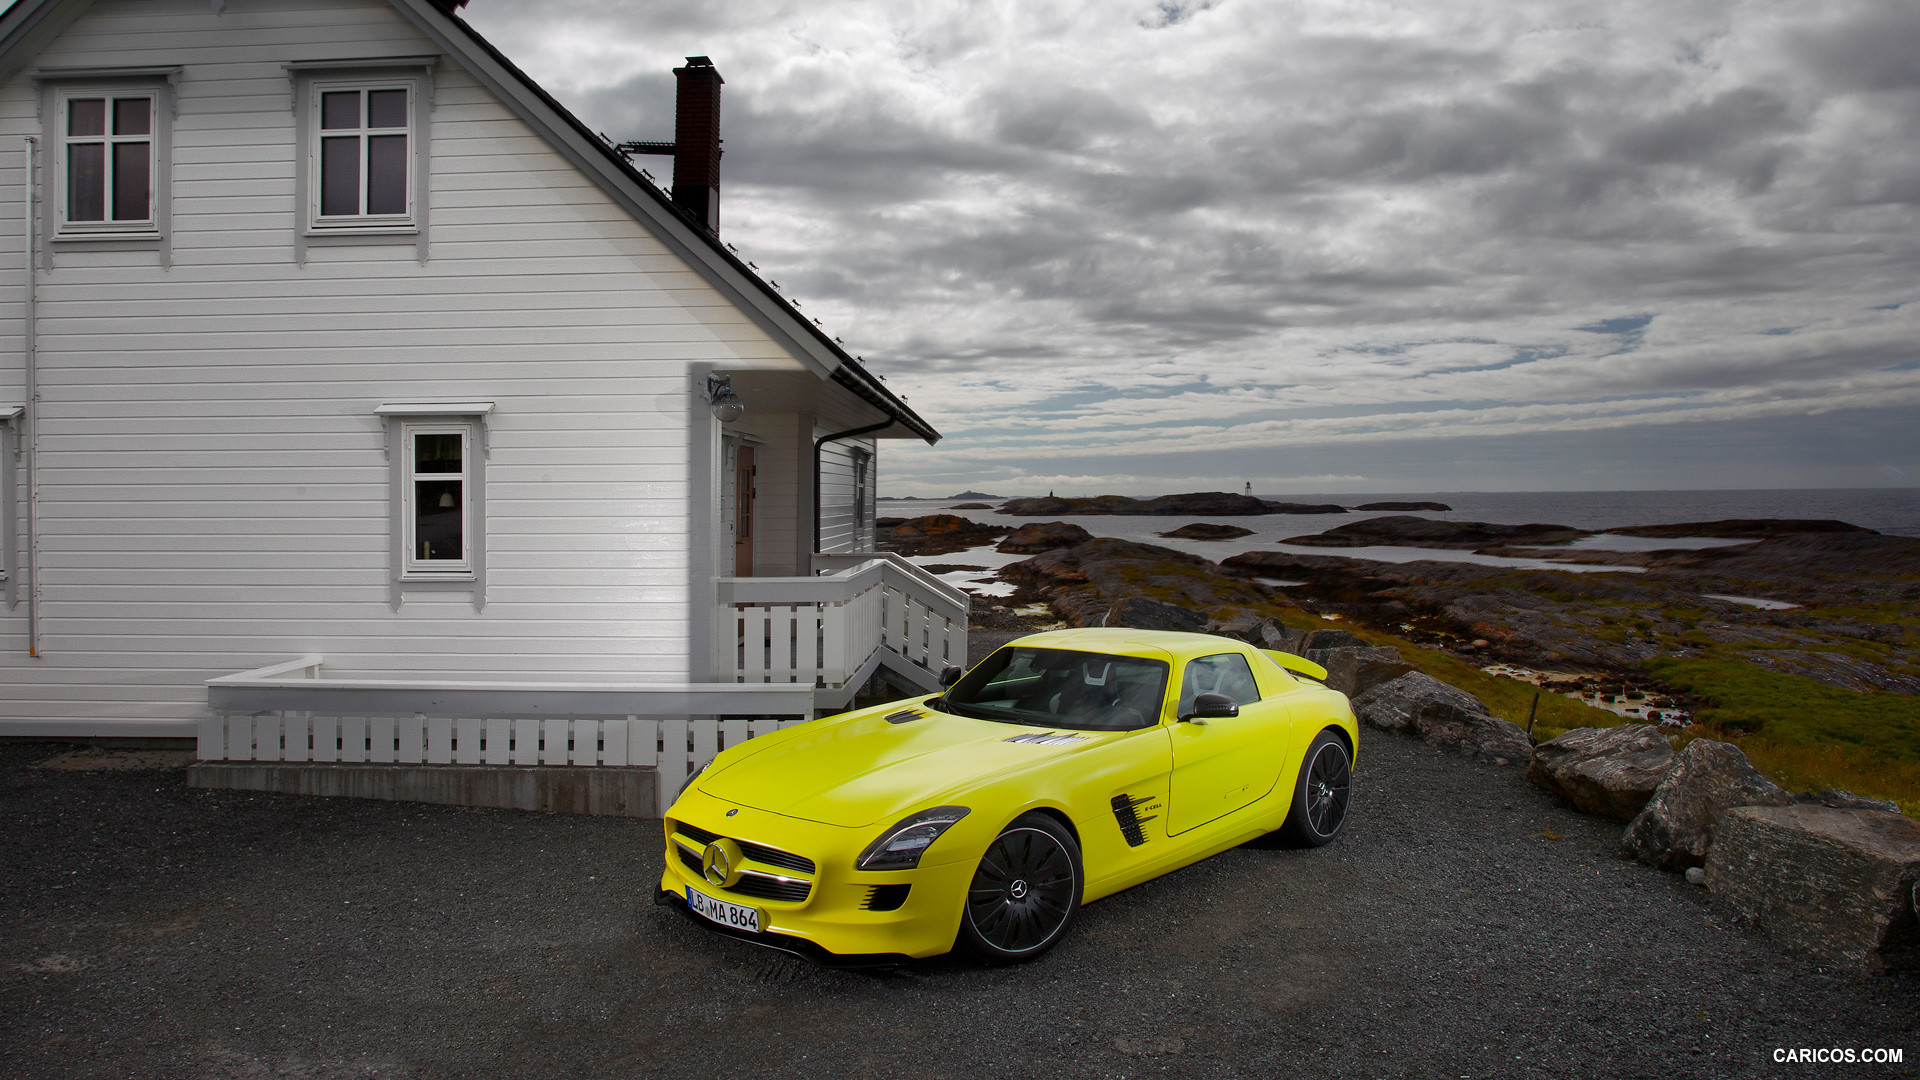 Mercedes-Benz SLS AMG E-CELL Concept  - Front, #3 of 60